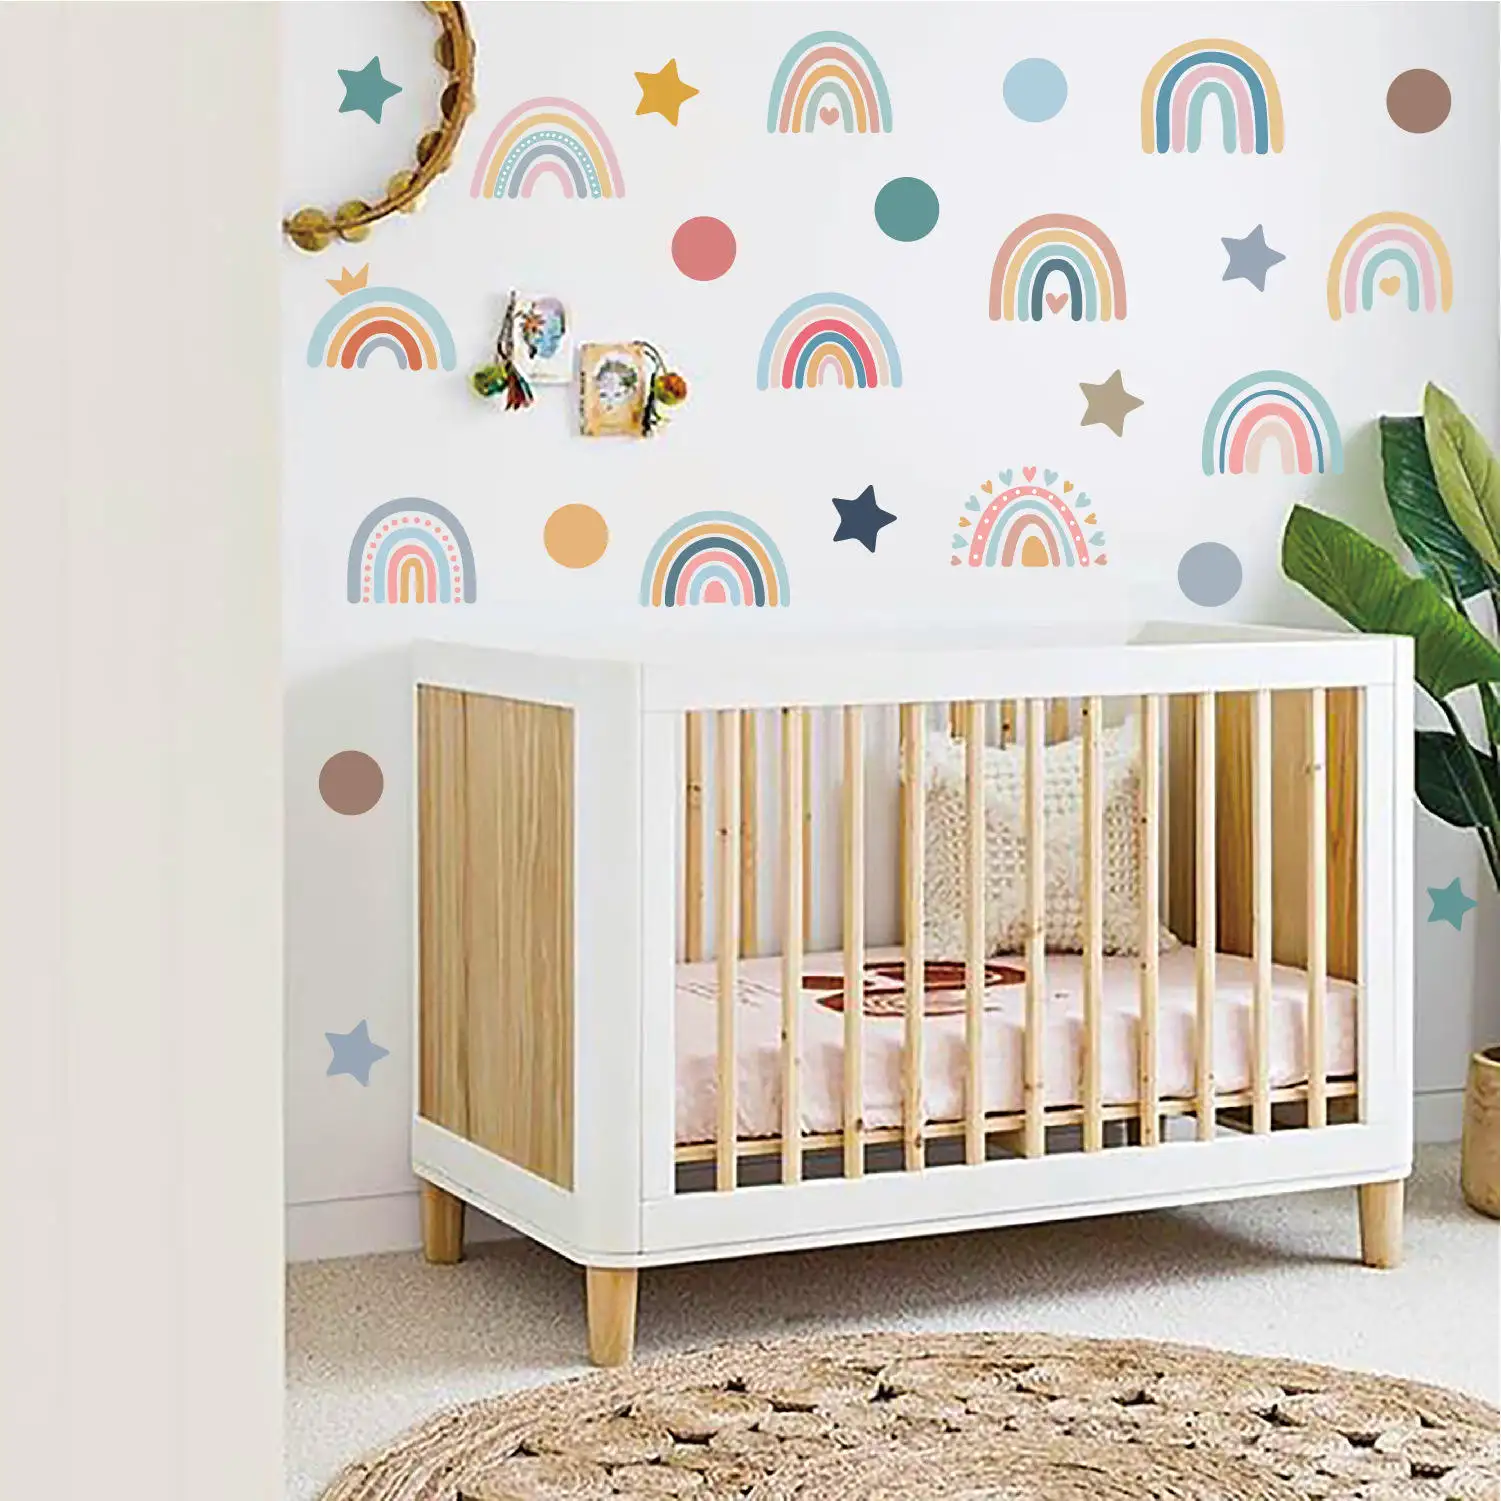 Custom Self-adhesive Removable Printing Decal PVC Vinyl Waterproof Home Decoration Children Wall Sticker for Kids Room Walls